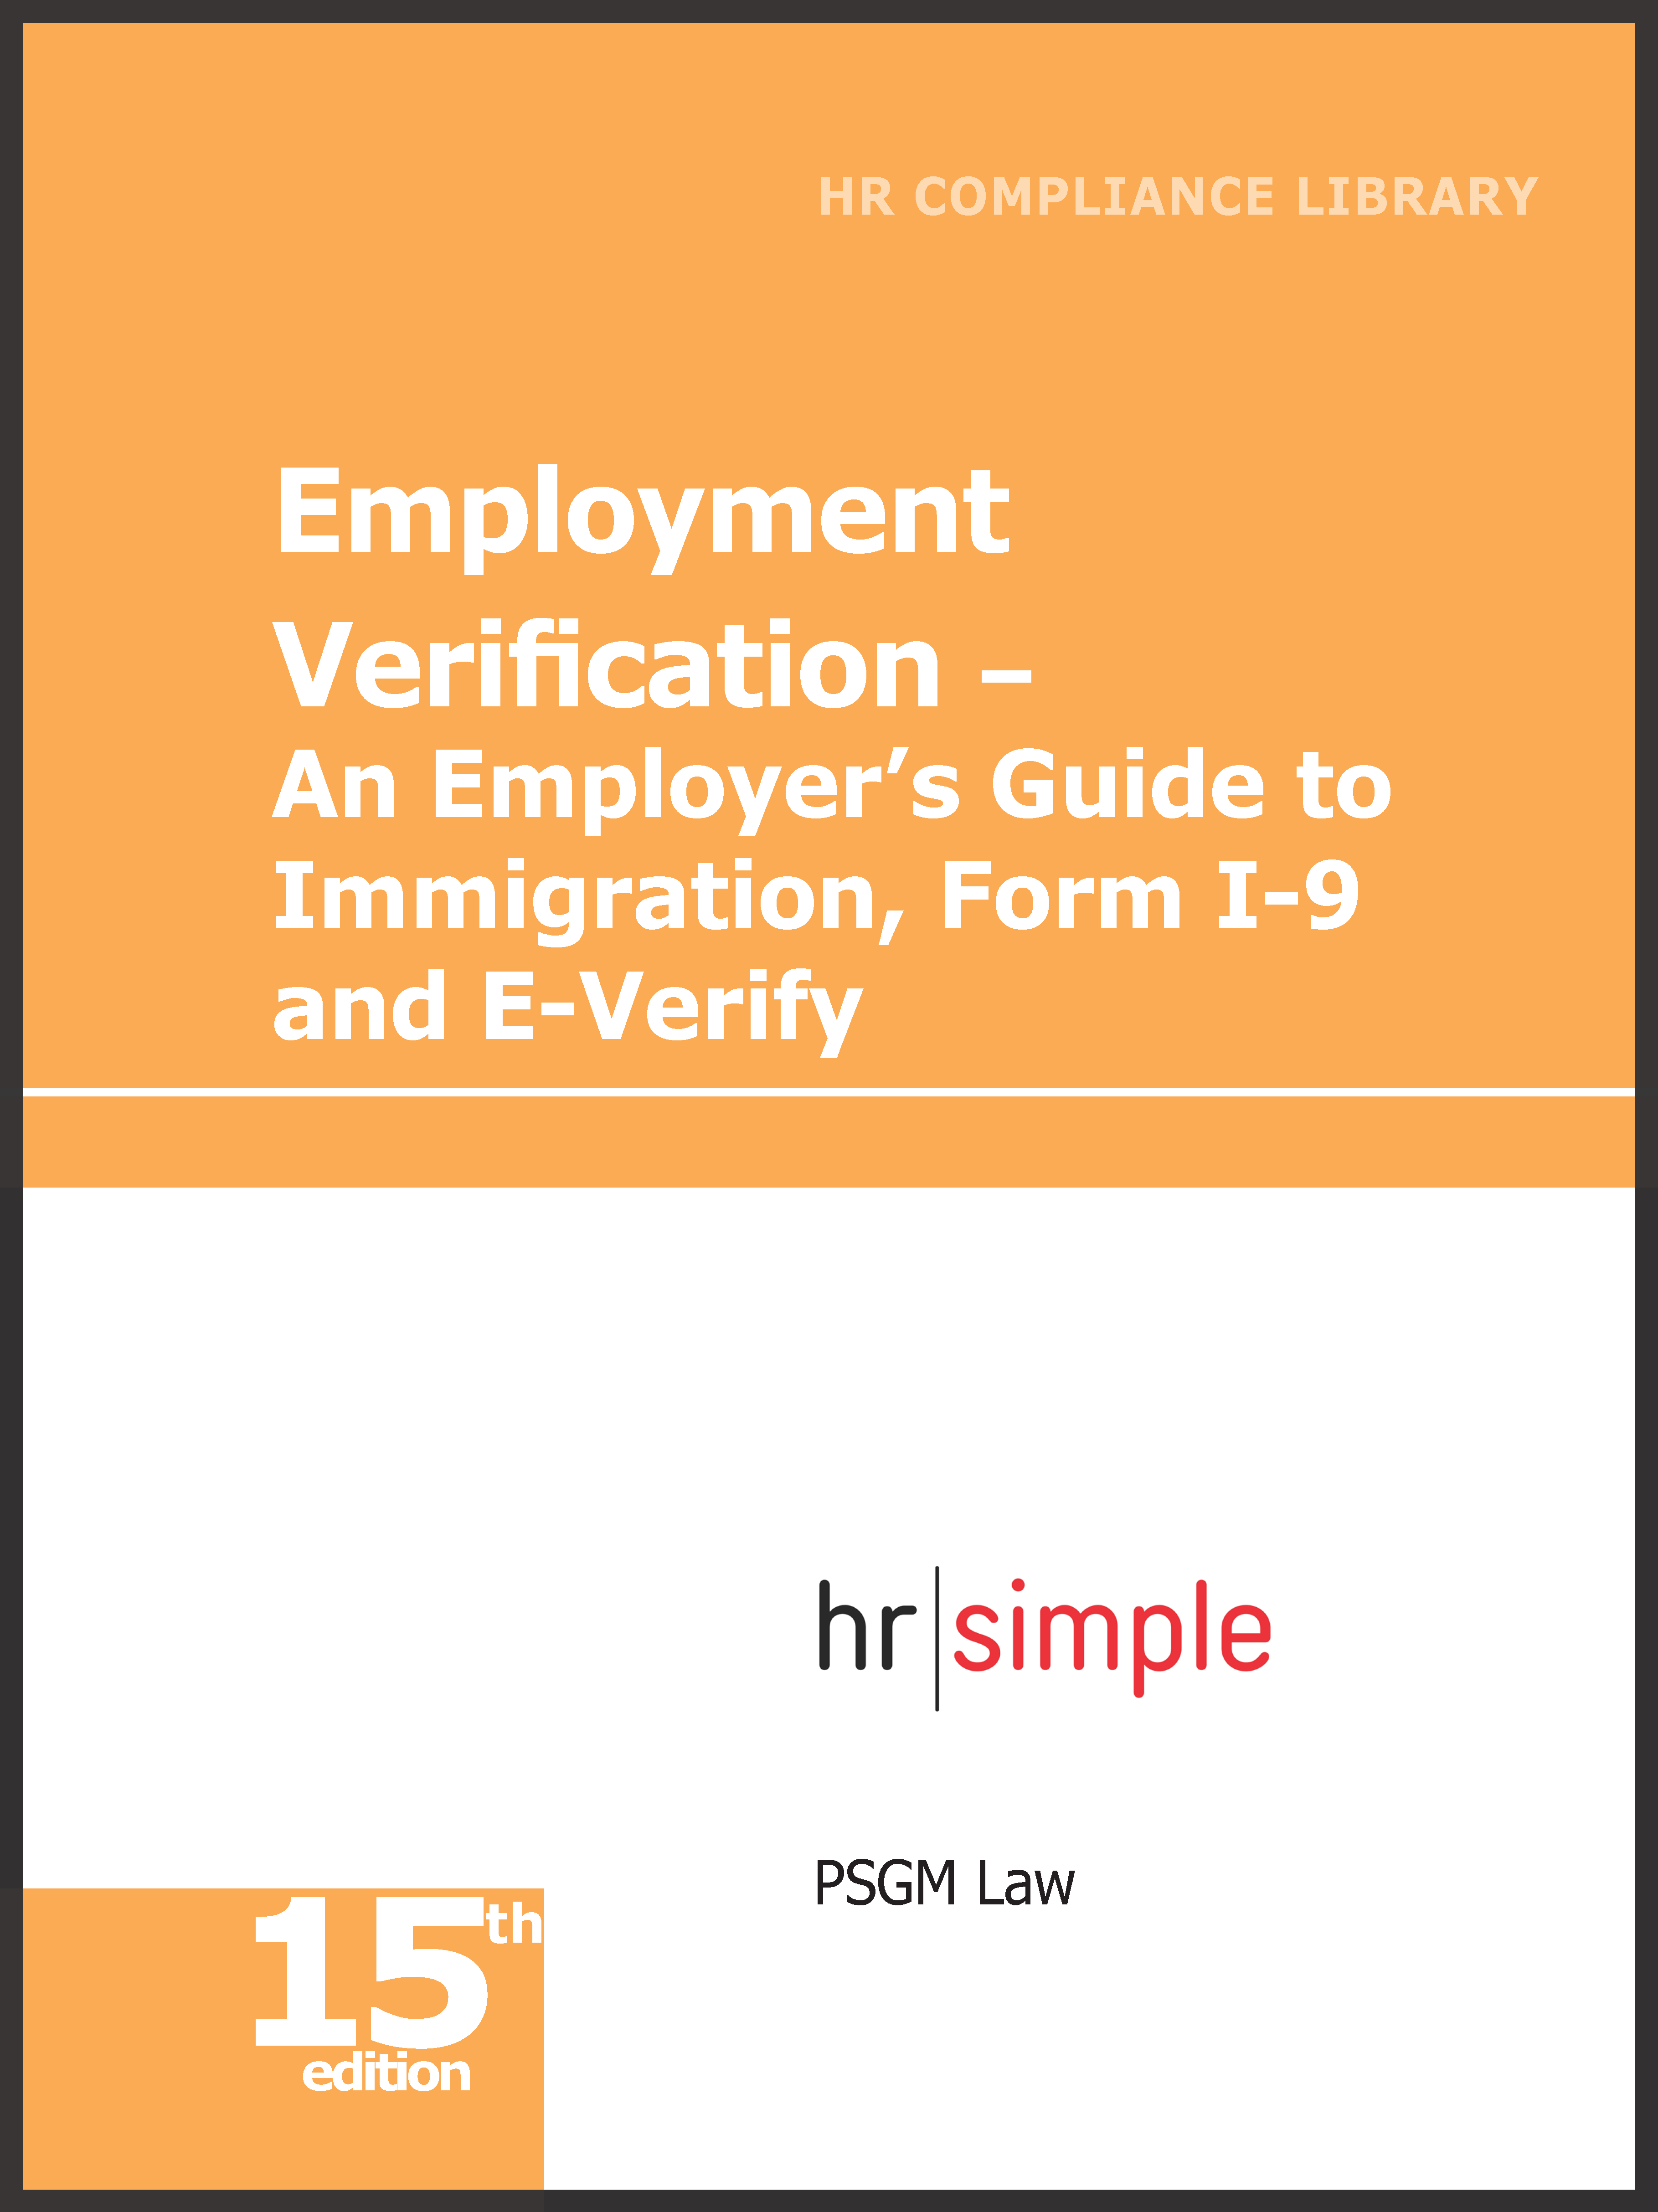 Employment Verification: Immigration, Form I-9, and E-Verify—Online Only  employment law image, remote work, labor laws, employment laws, right to work, order of protection, minimum wage